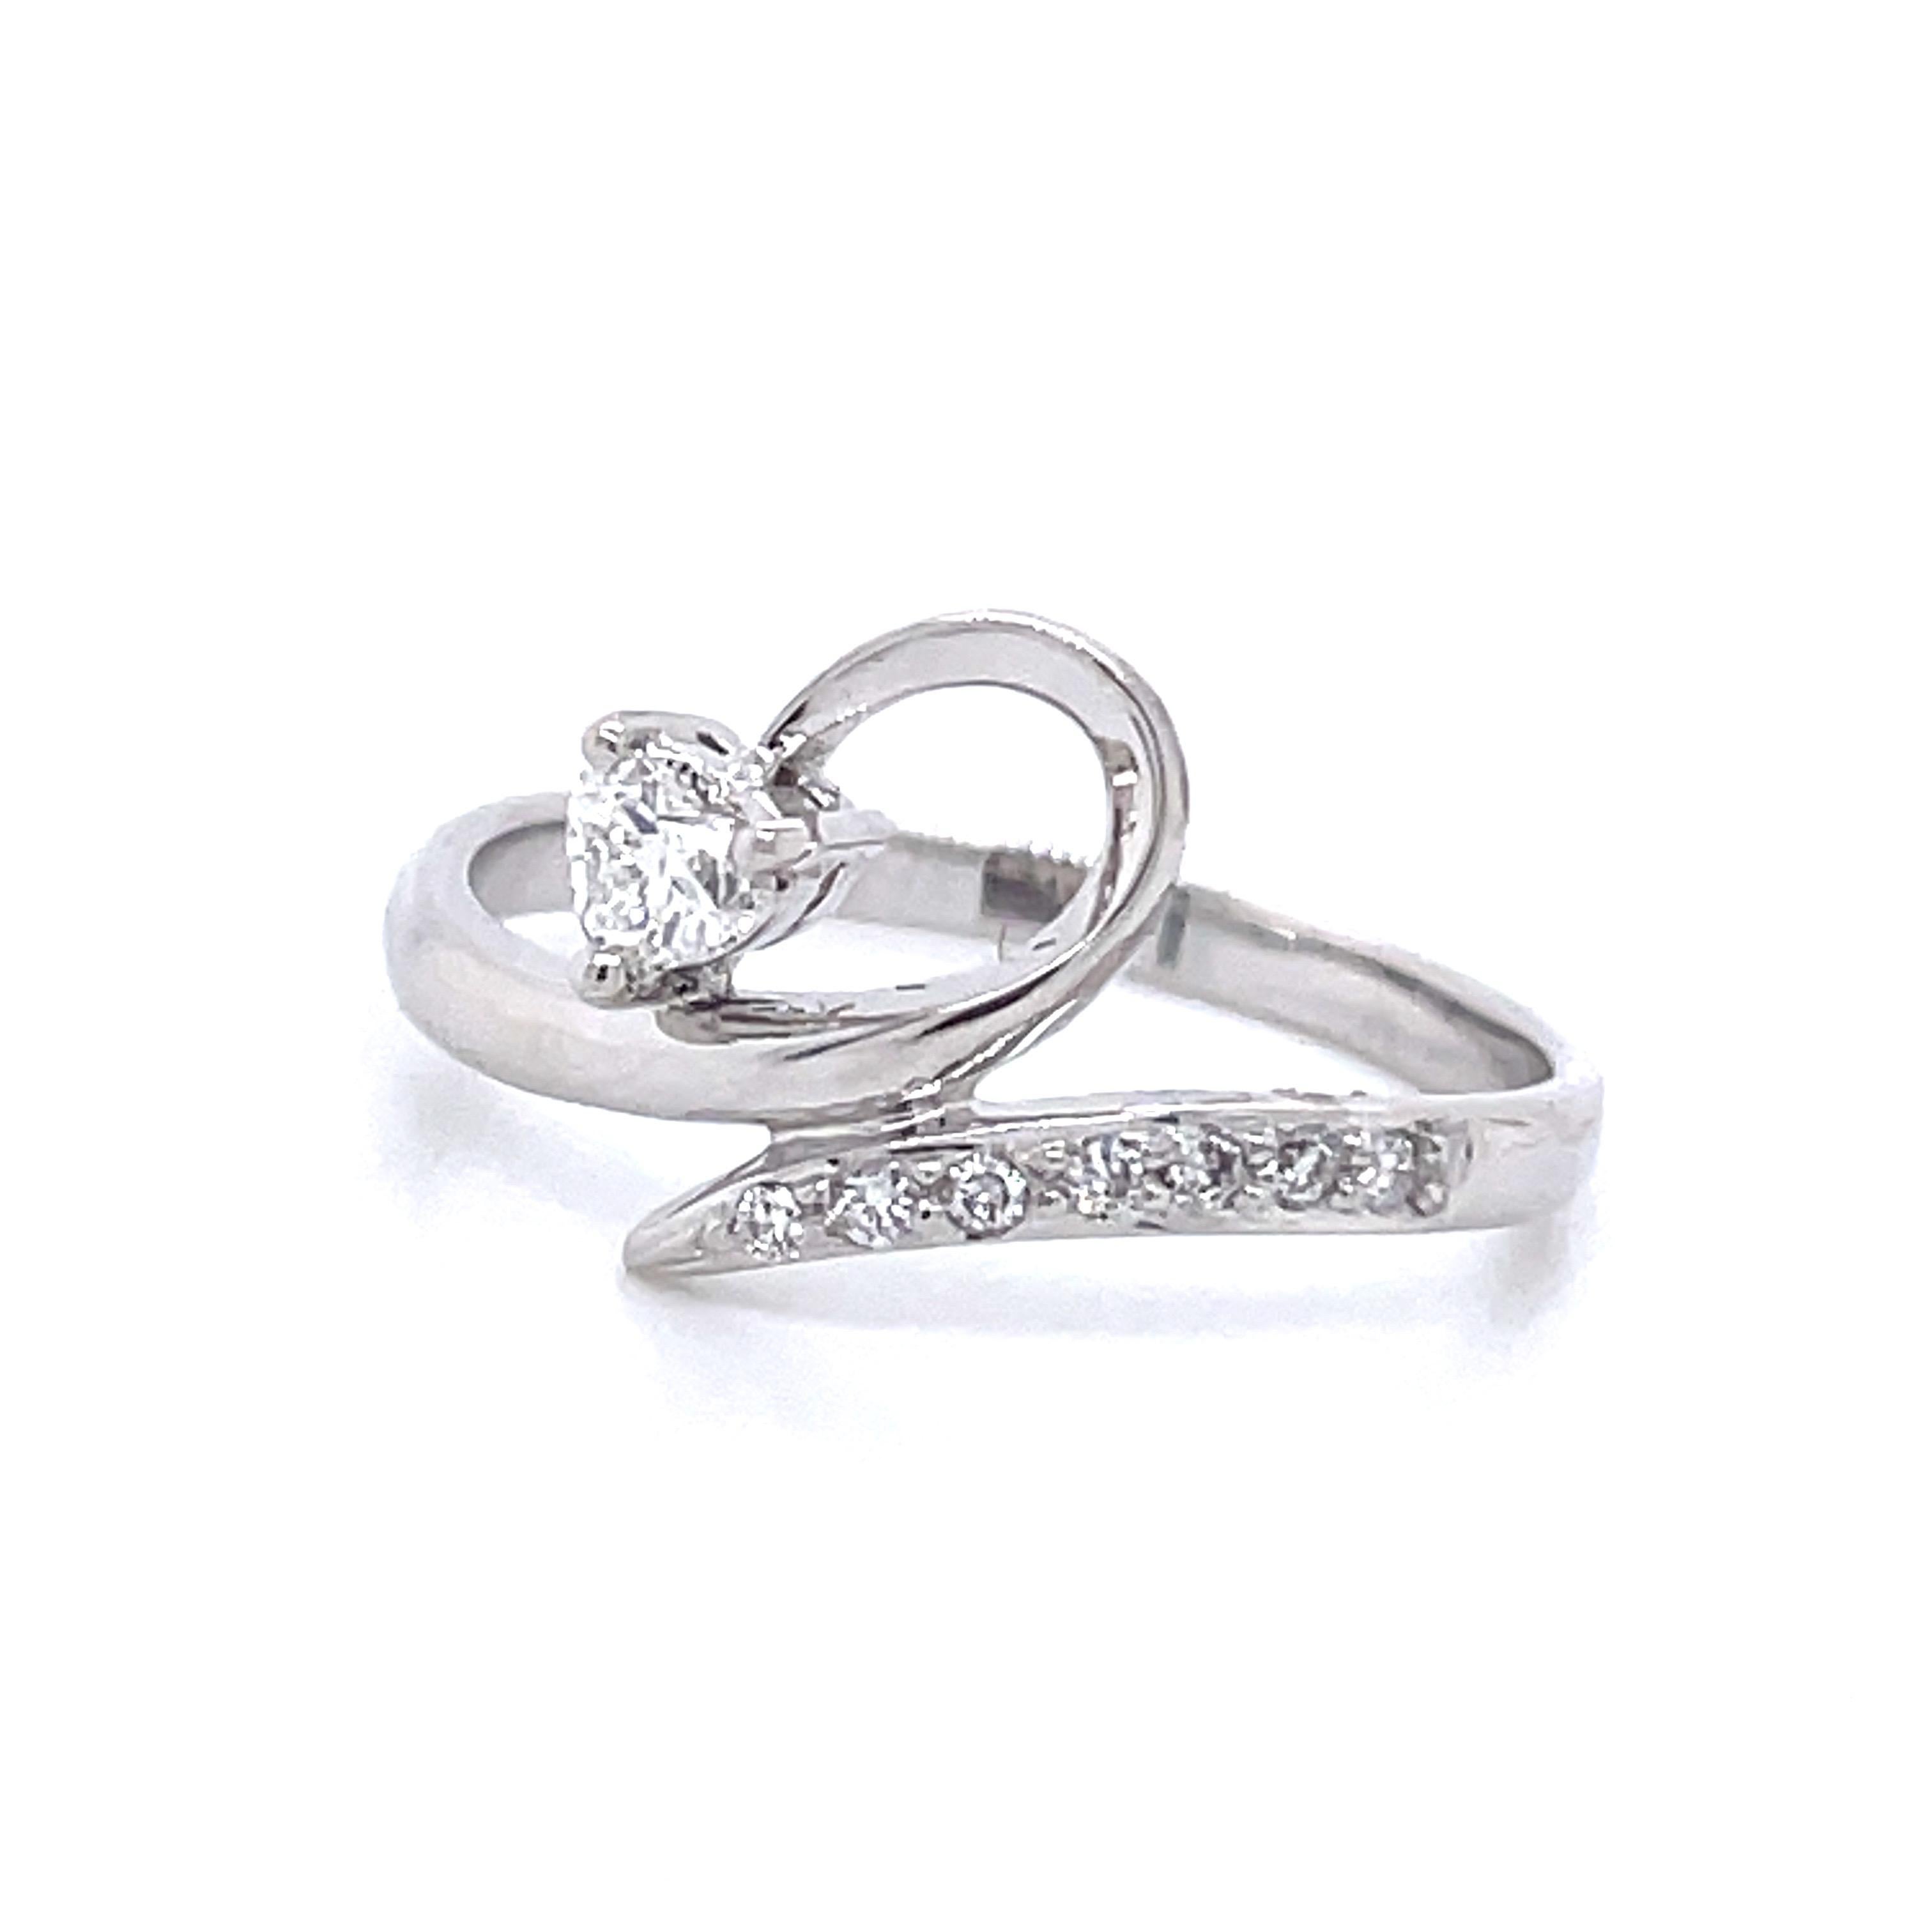 ts distinctive design—a half heart swirl leading to a heart-shaped diamond, totaling 0.13 carats, delicately placed at the end. 

Seven round diamonds, totaling 0.05 carats, elegantly grace the shoulders, enhancing the ring's allure.

This unique